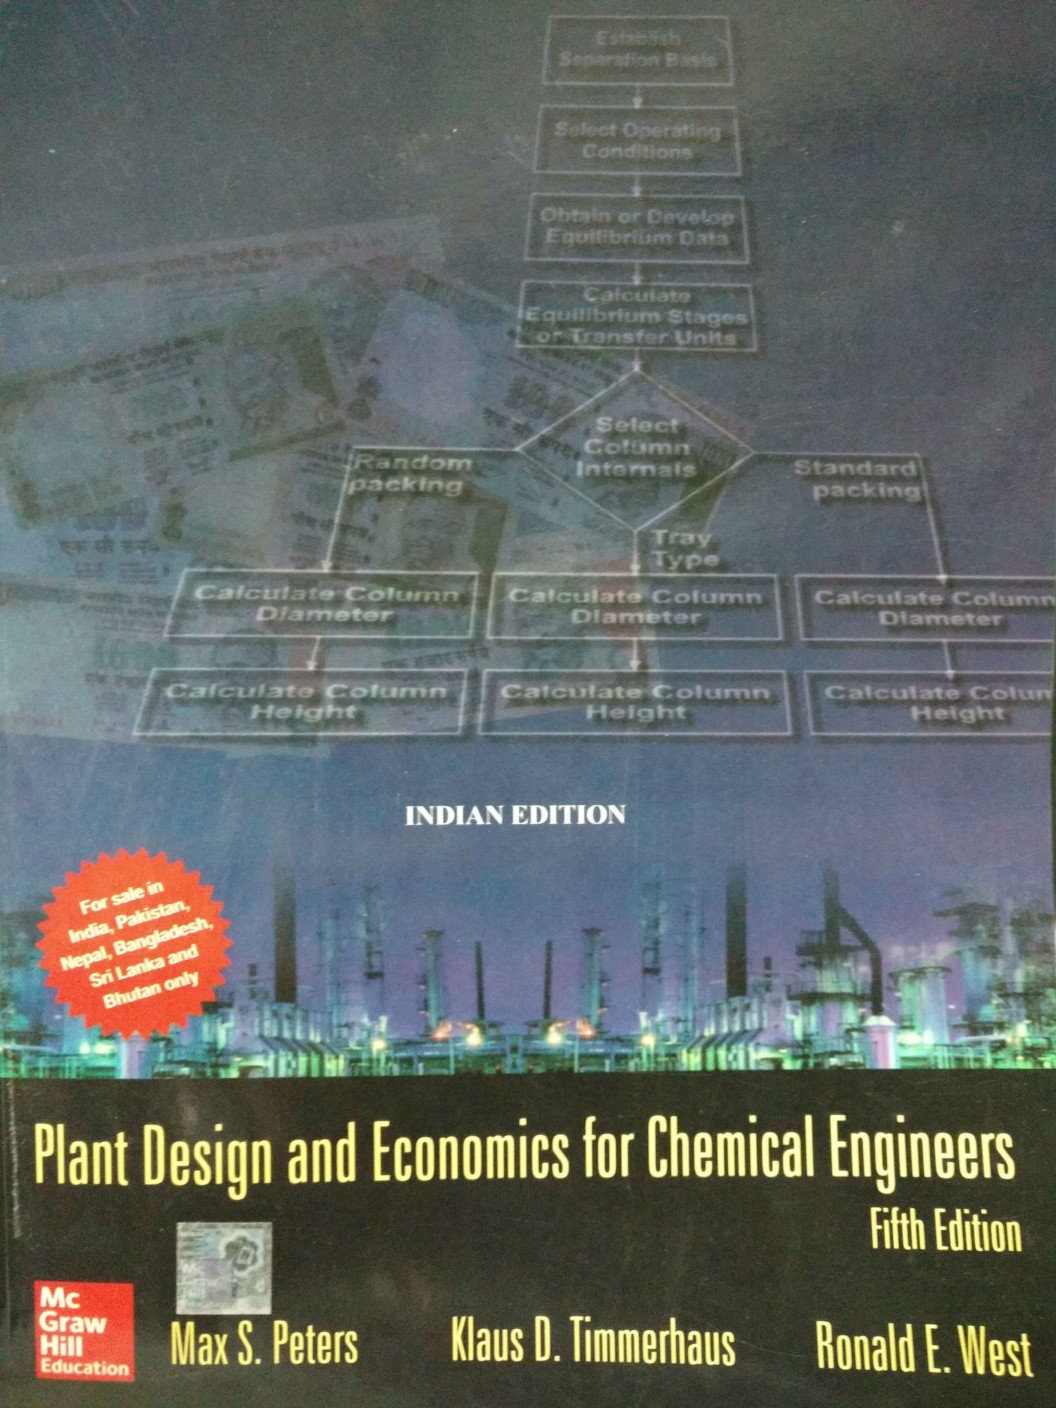 Plant Design and Economics for Chemical Engineers 5thedition Edition 5th Edition Buy Plant